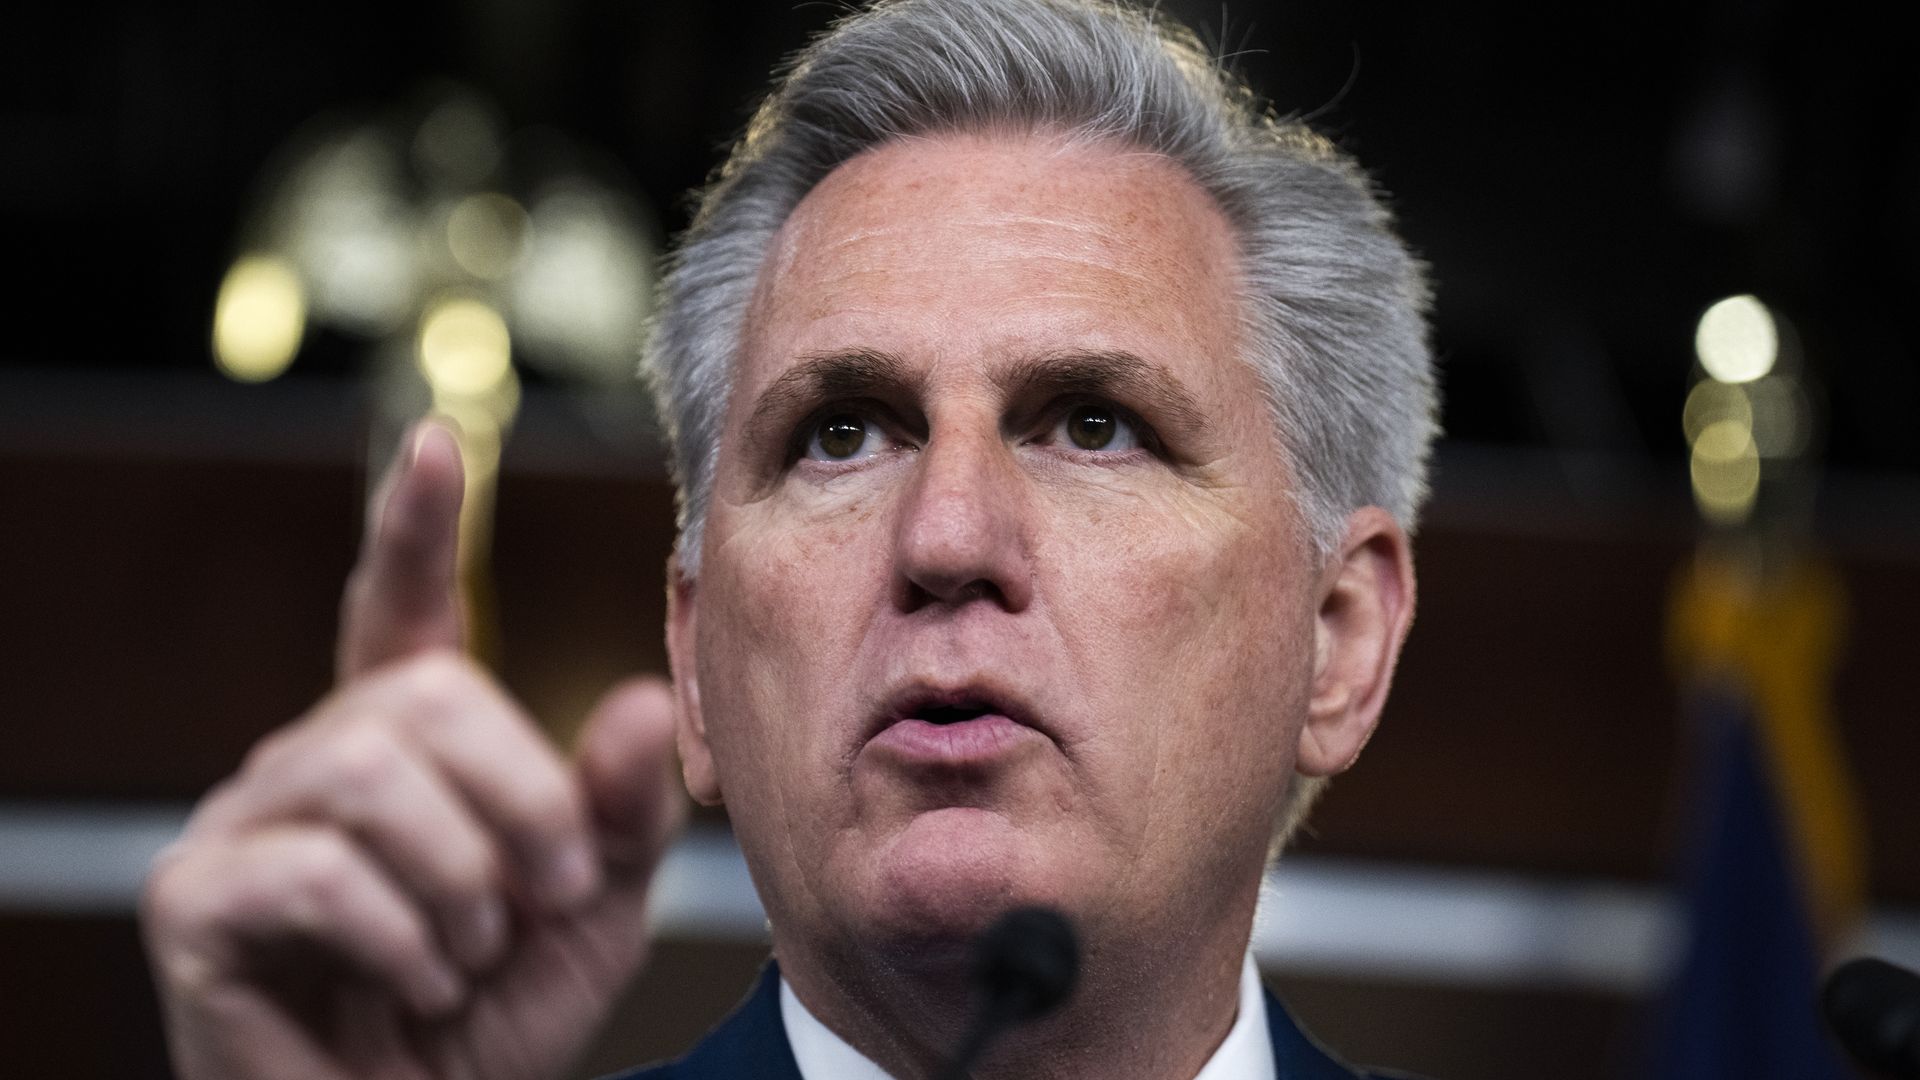 House Minority Leader Kevin McCarthy is seen pointing during a news conference.